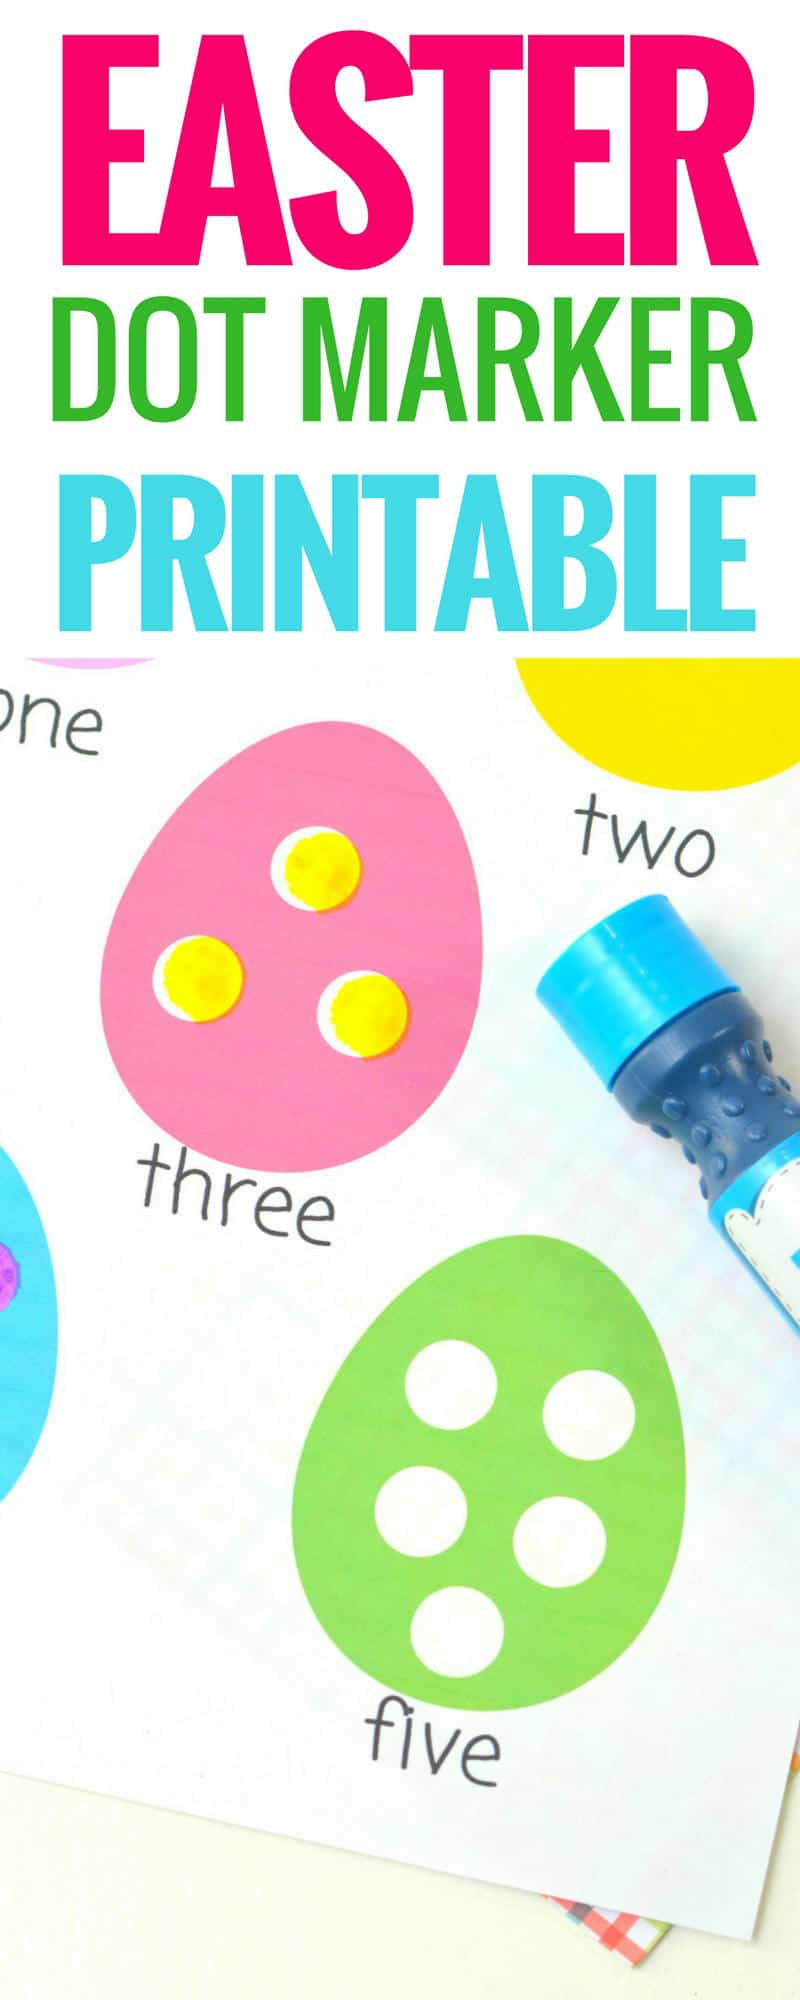 Free Easter Egg Dot Marker Printable Counting Activity for Preschoolers